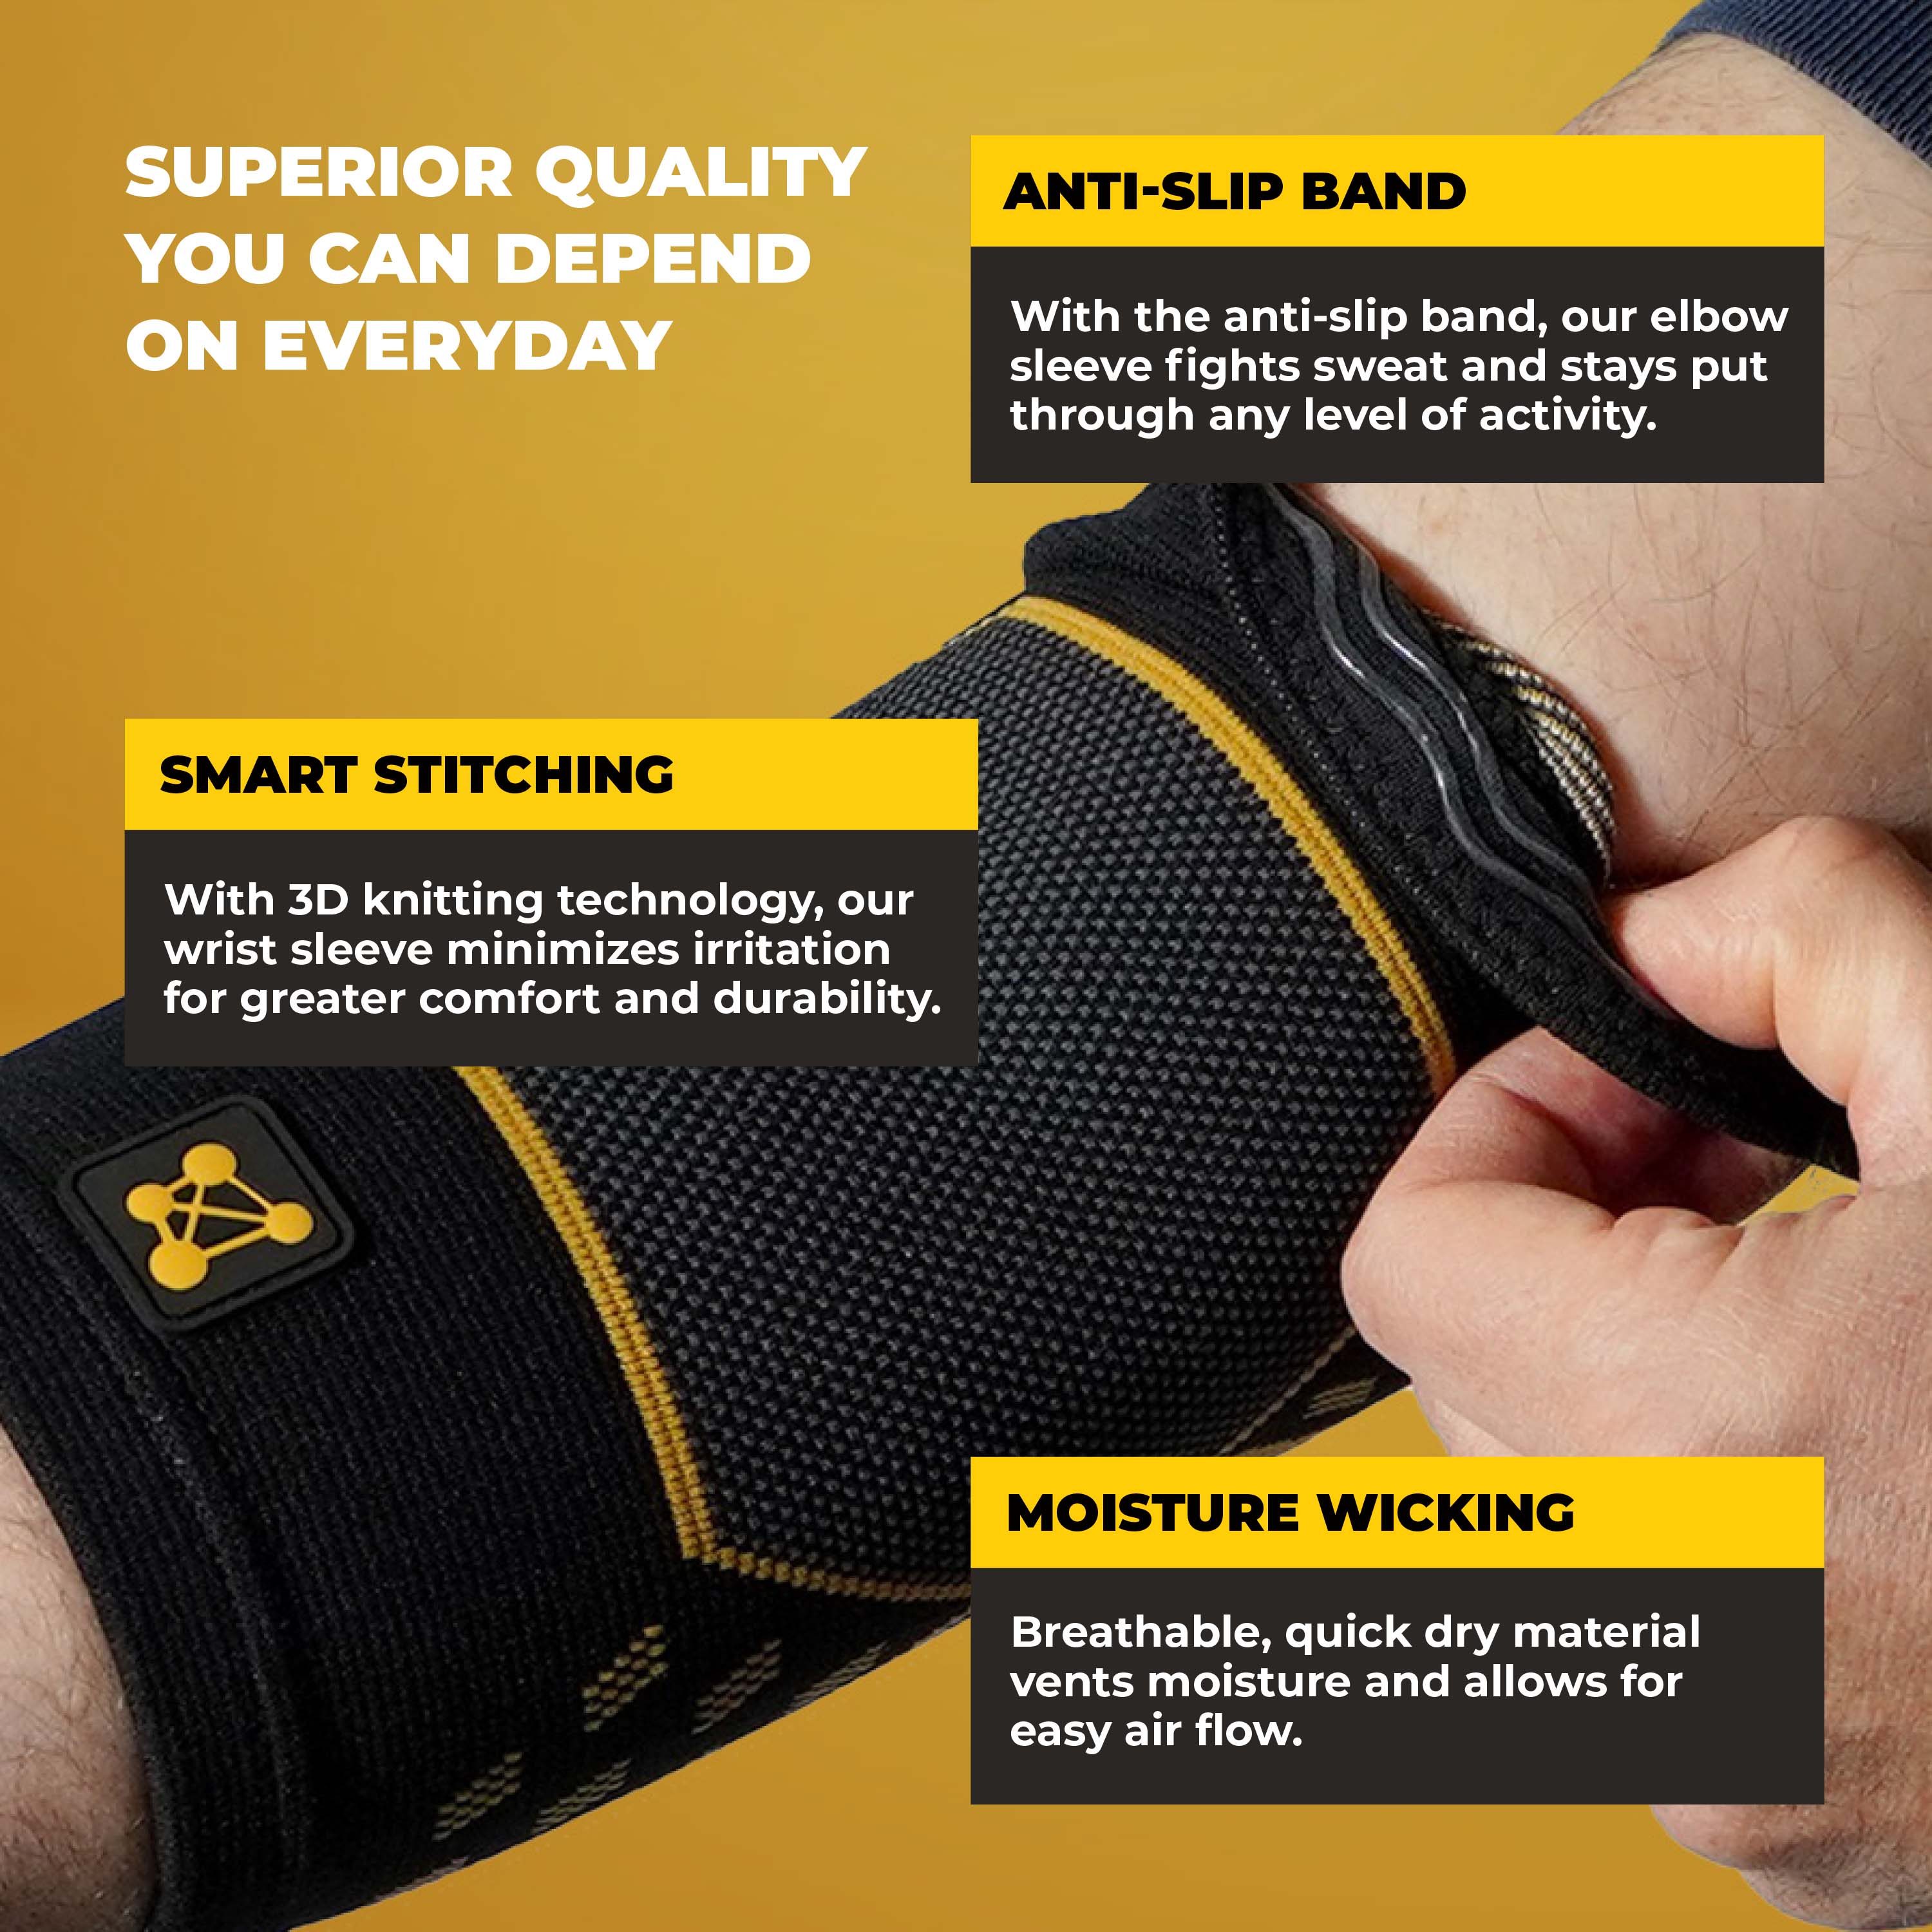 New Elbow Compression Received Well by Amazon Customers